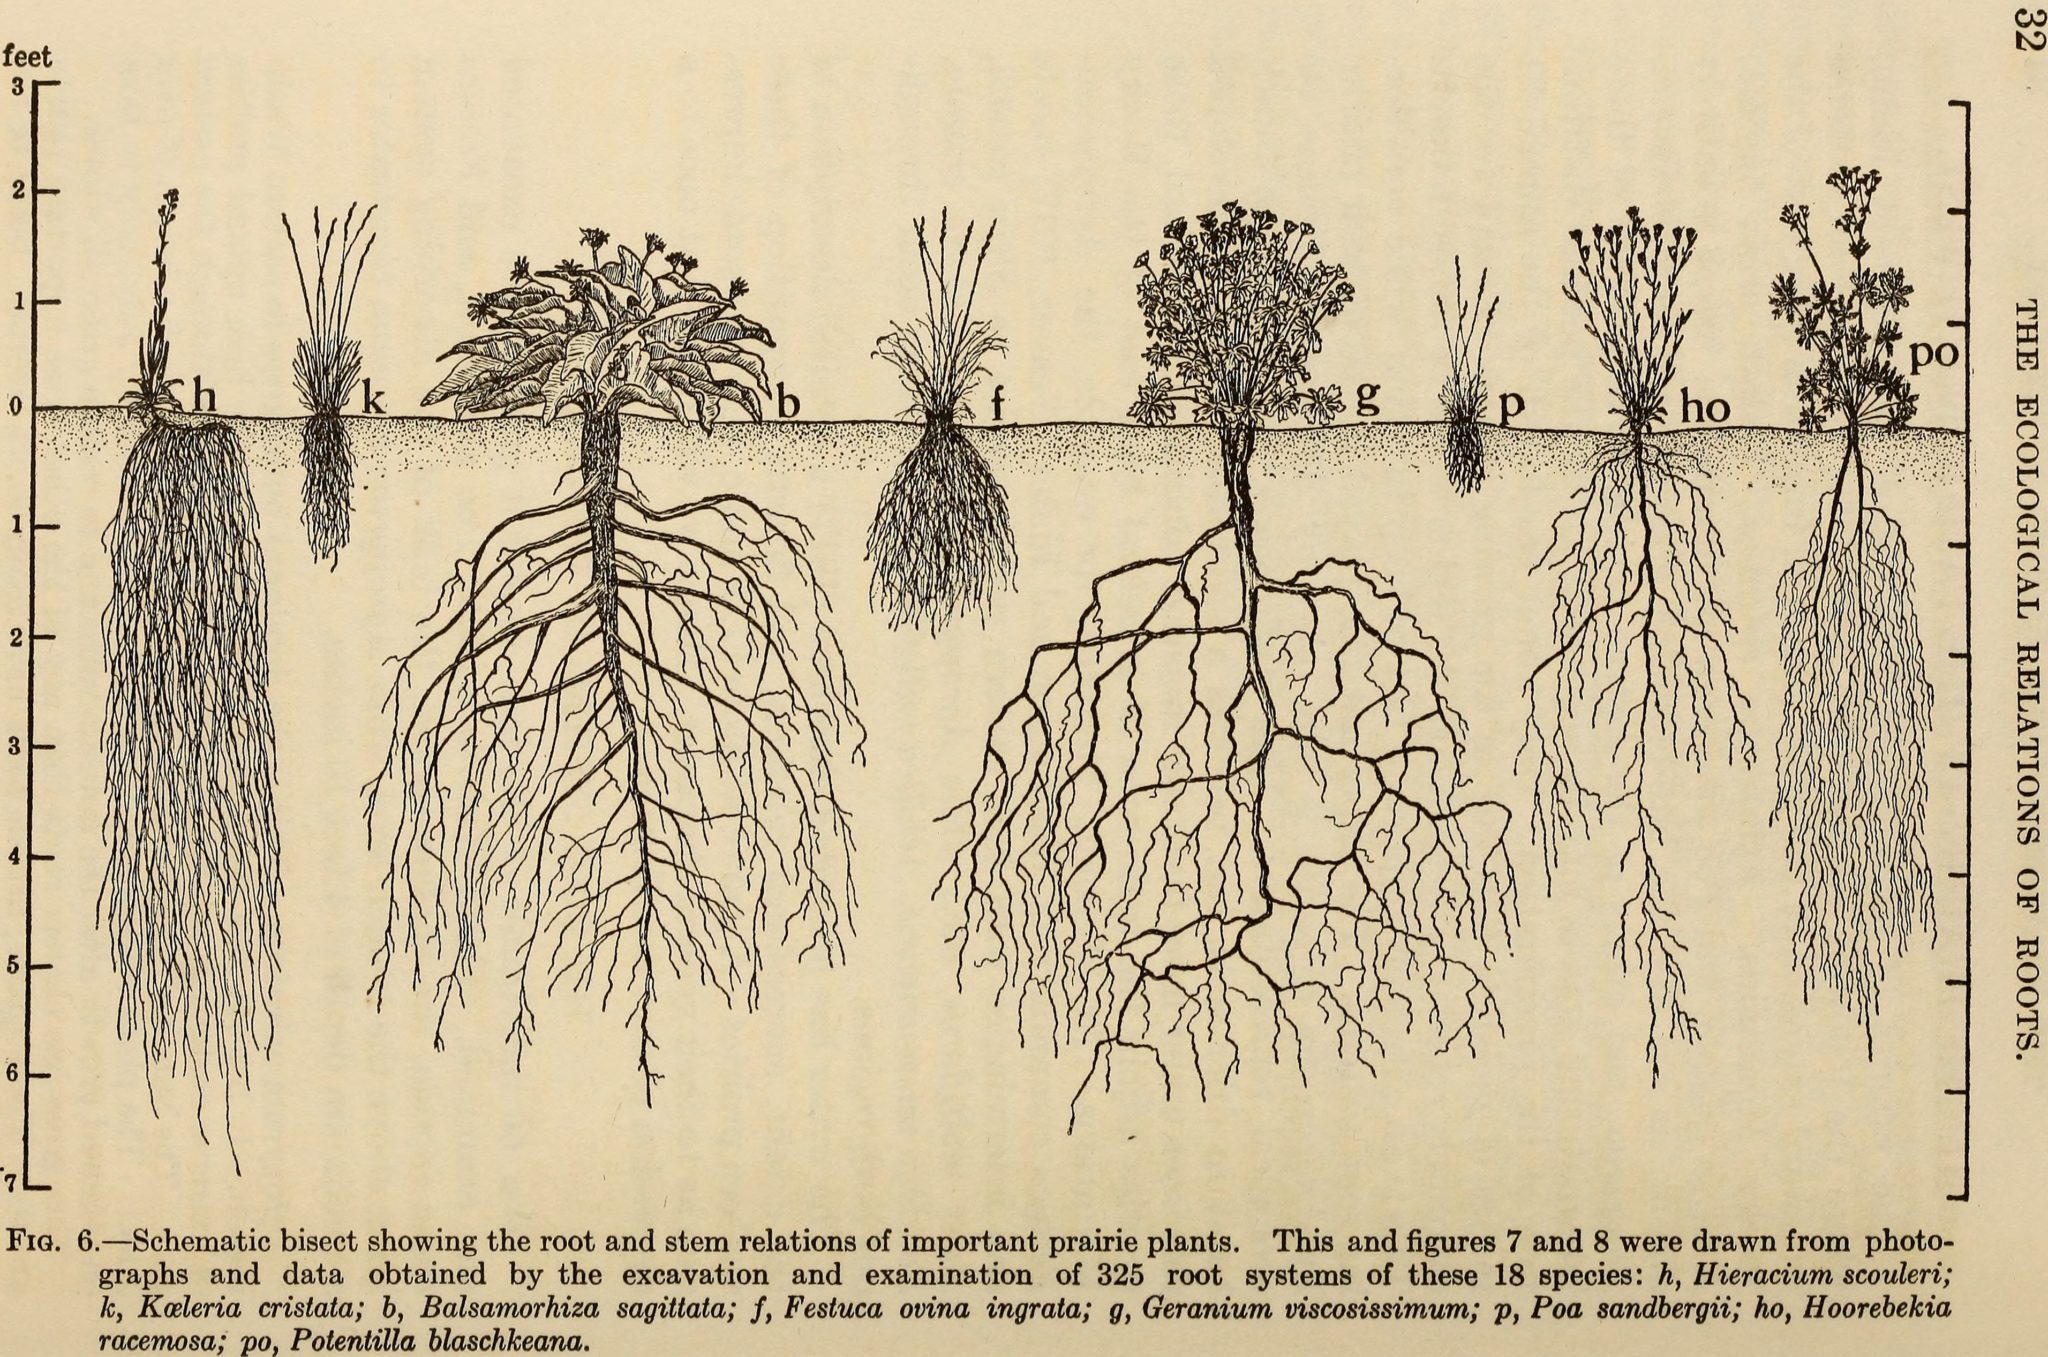 Drawing of native plants showing the comparative root depth of each